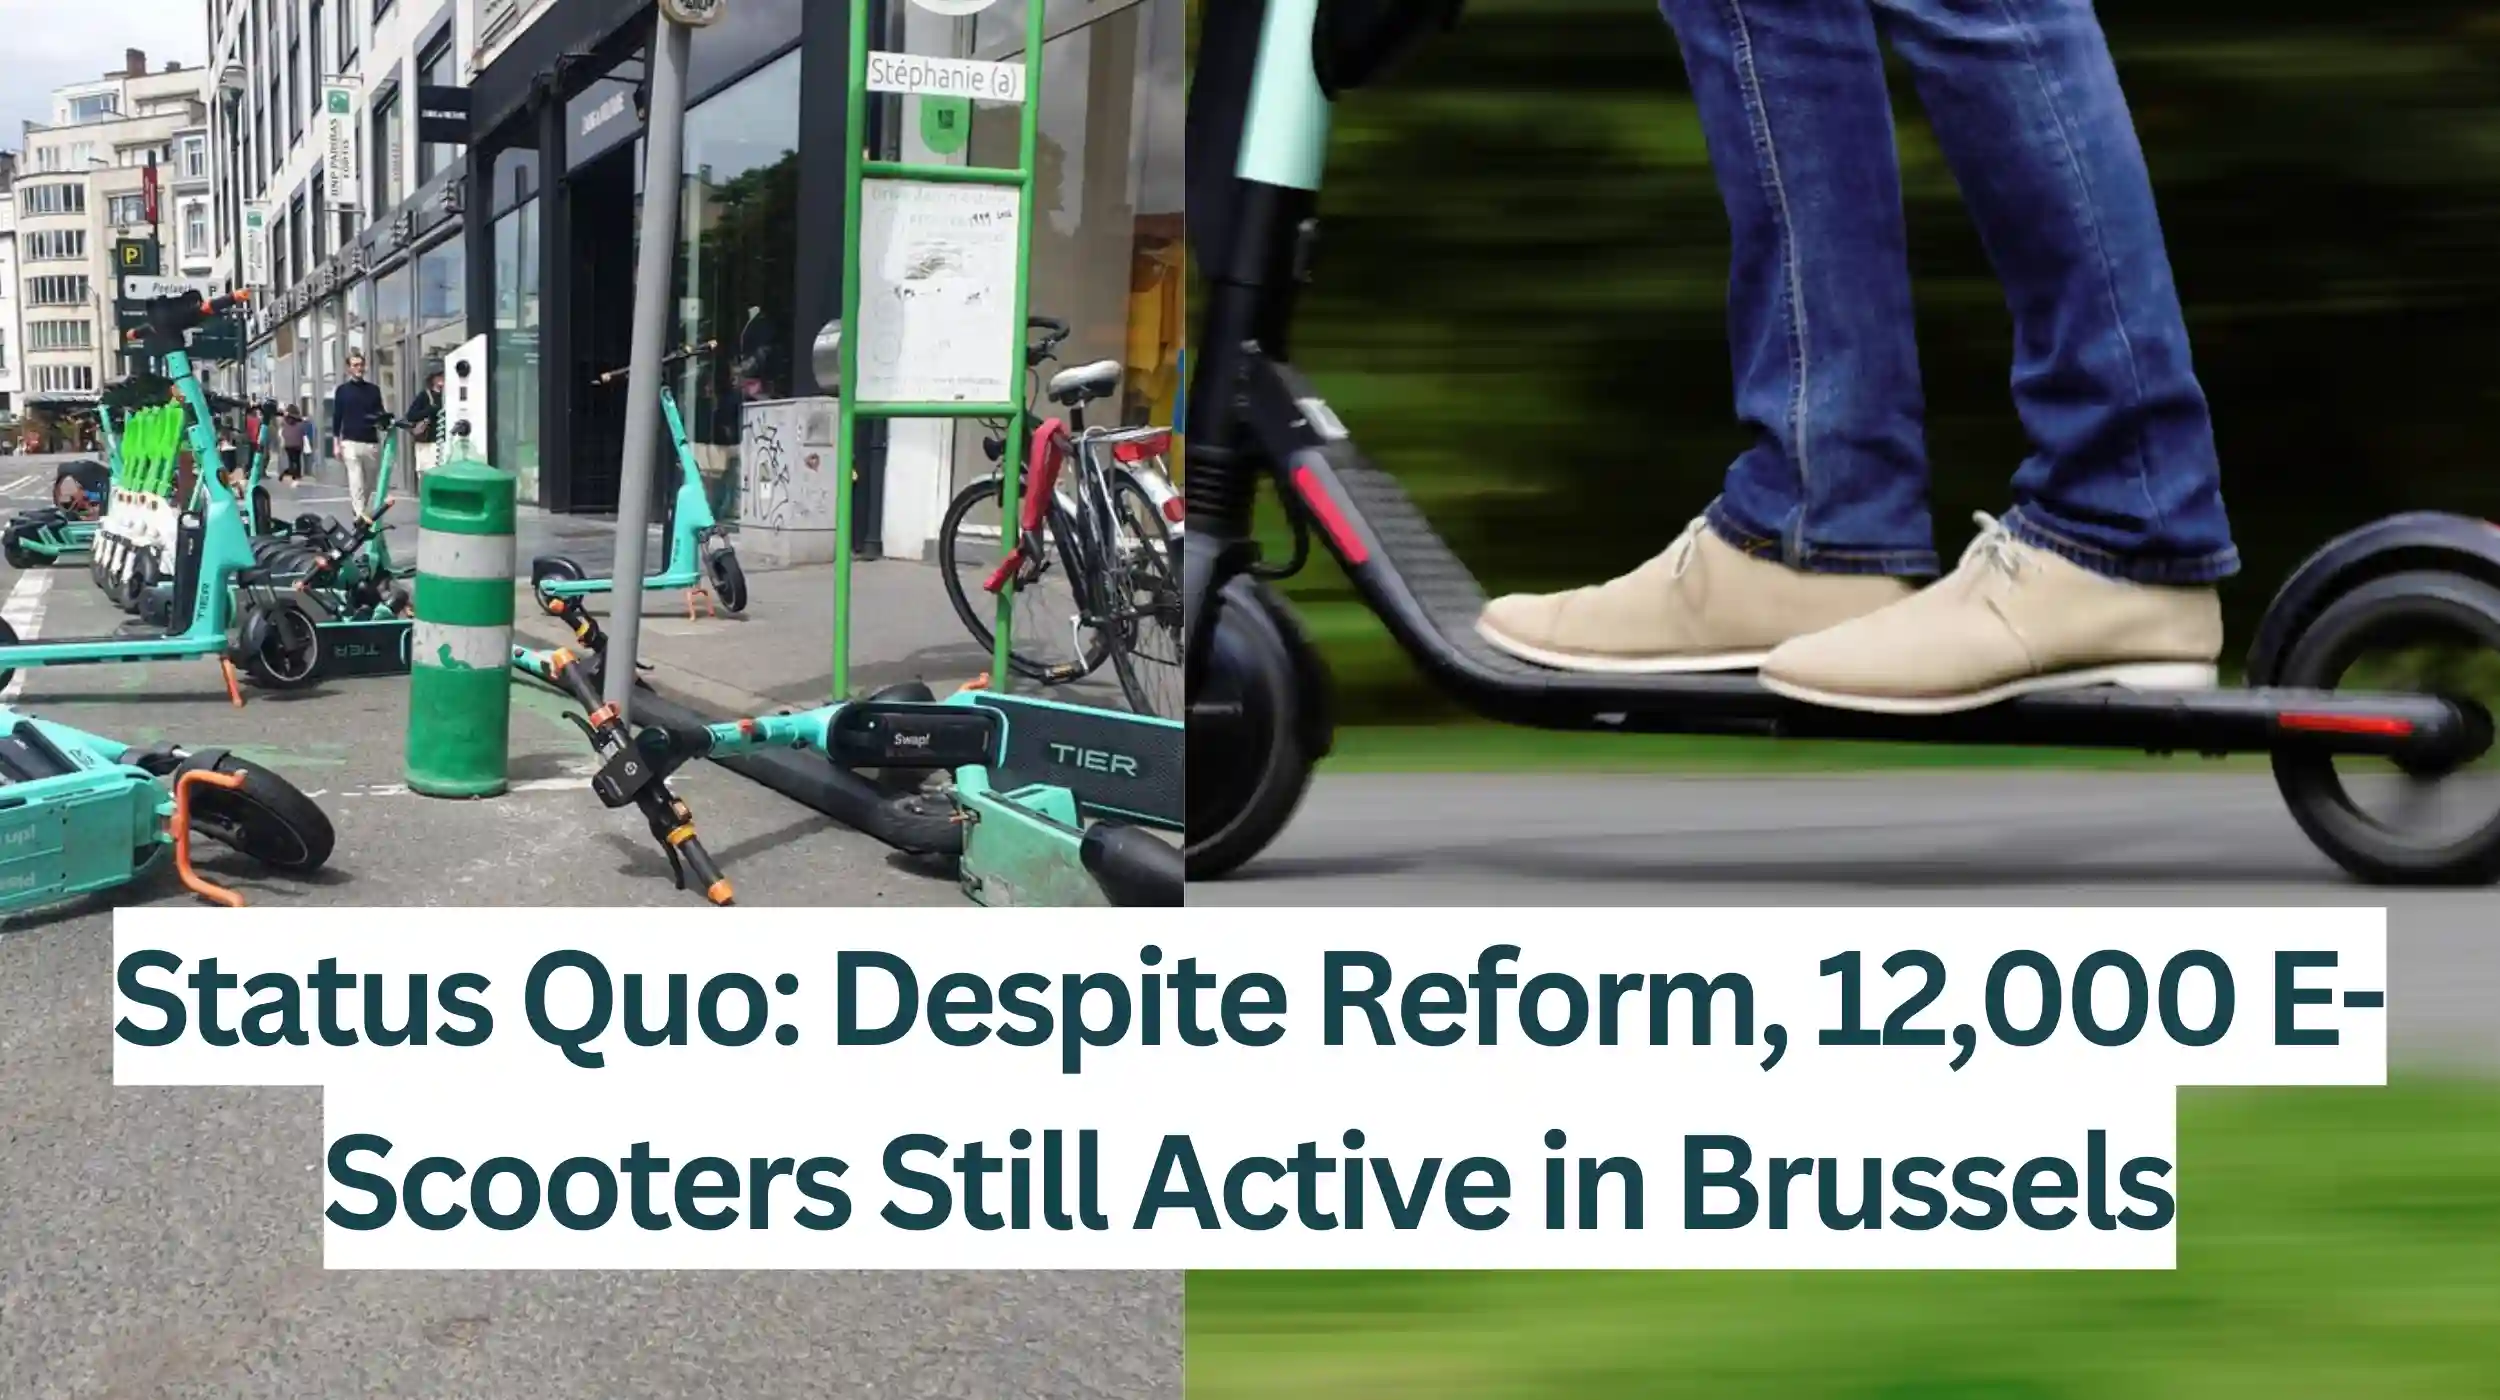 Status-Quo-Despite-Reform-12000-E-Scooters-Still-Active-in-Brussels